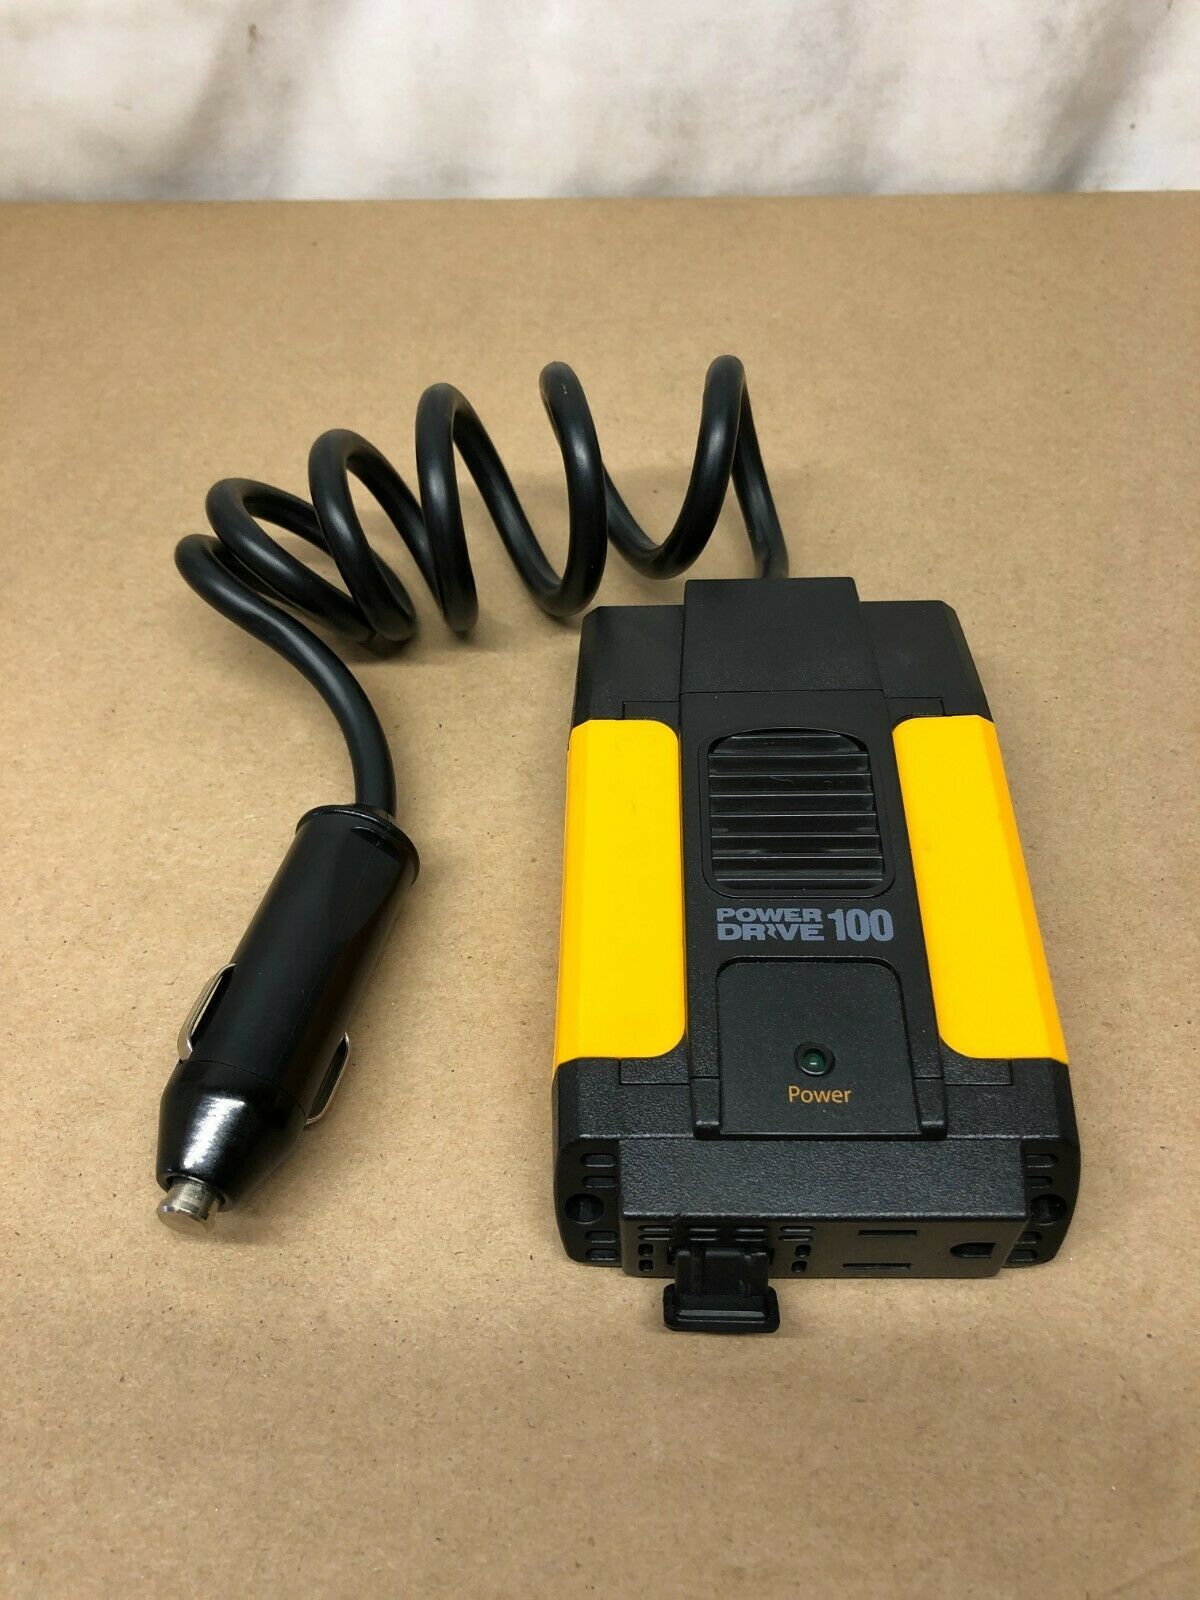 PowerDrive100 DC AC Power Inverter w/ USB and 50 similar items